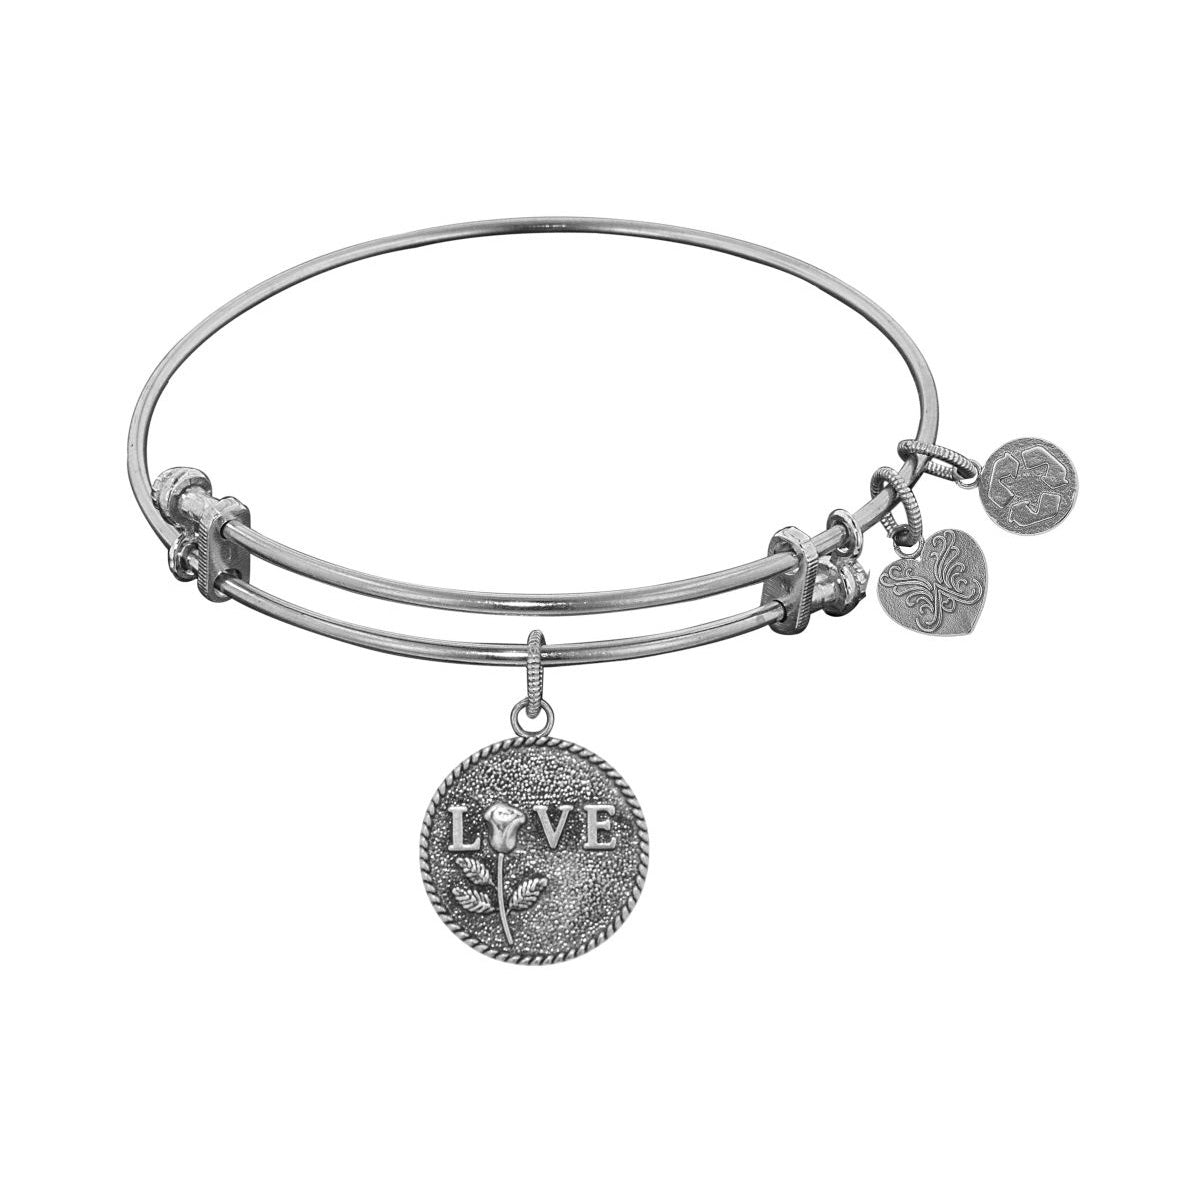 Stipple Finish Brass Love With Rose Angelica Bangle Bracelet, 7.25" fine designer jewelry for men and women